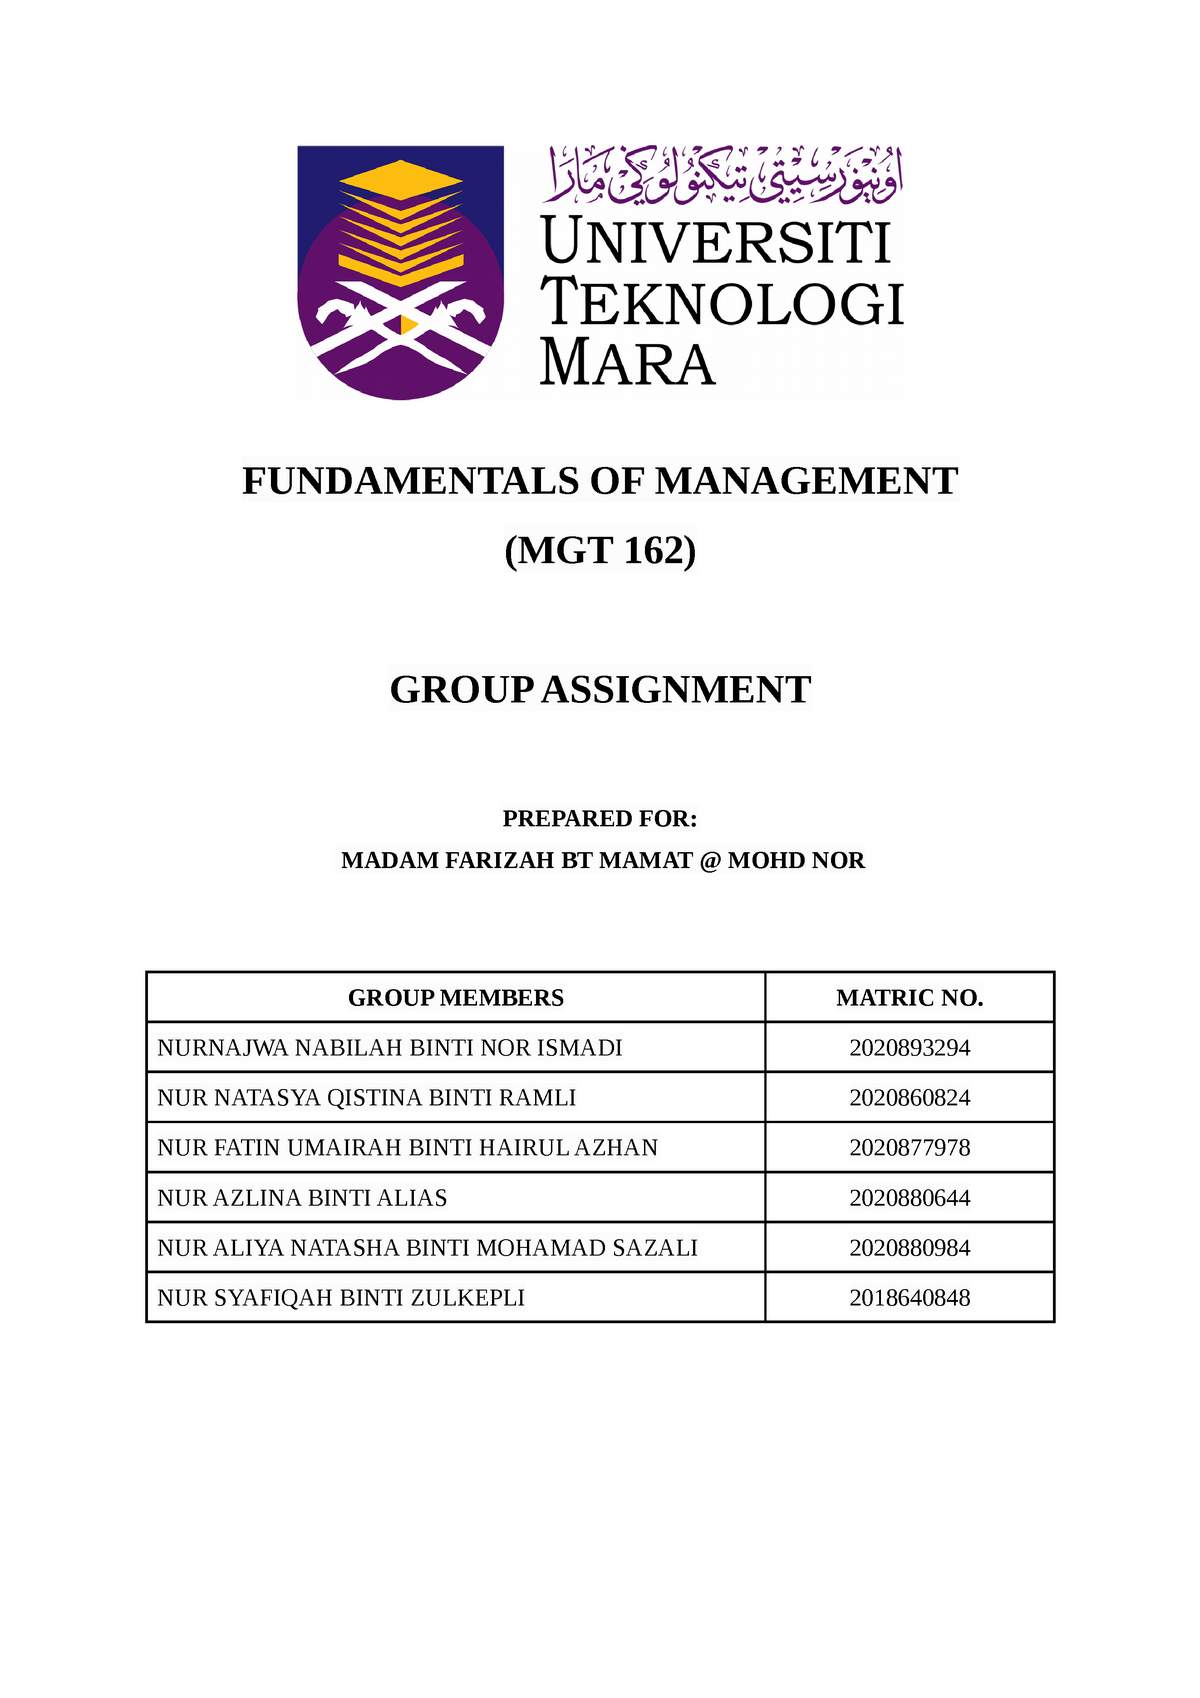 mgt162 group assignment example